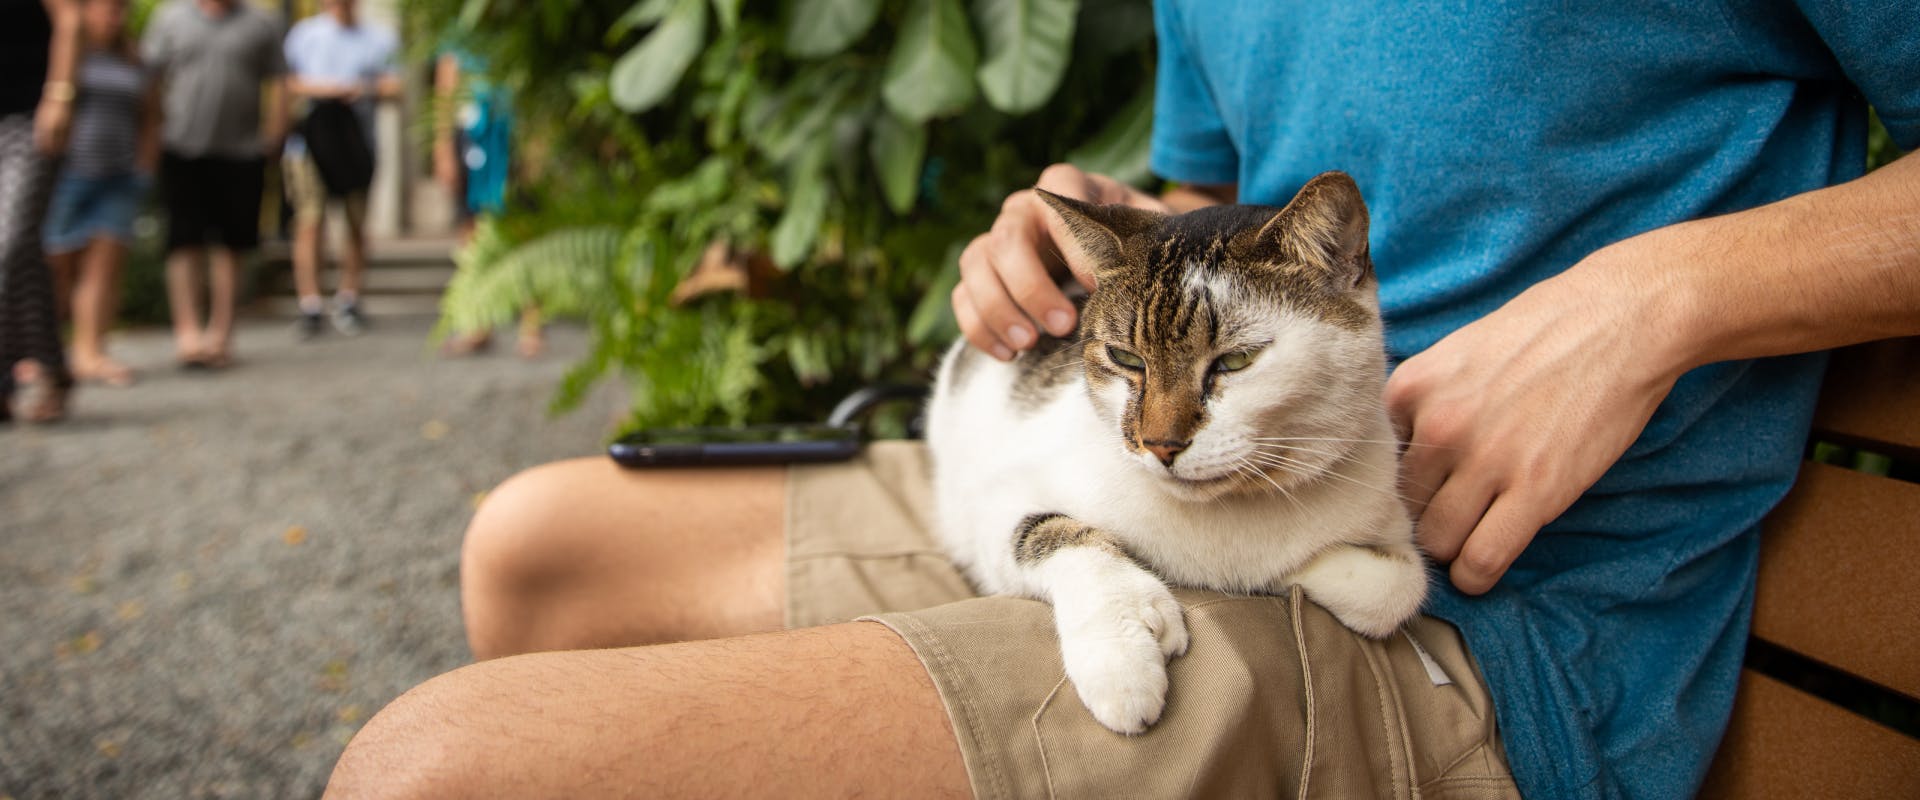 polydactyl cat sat on a person's lap in a park